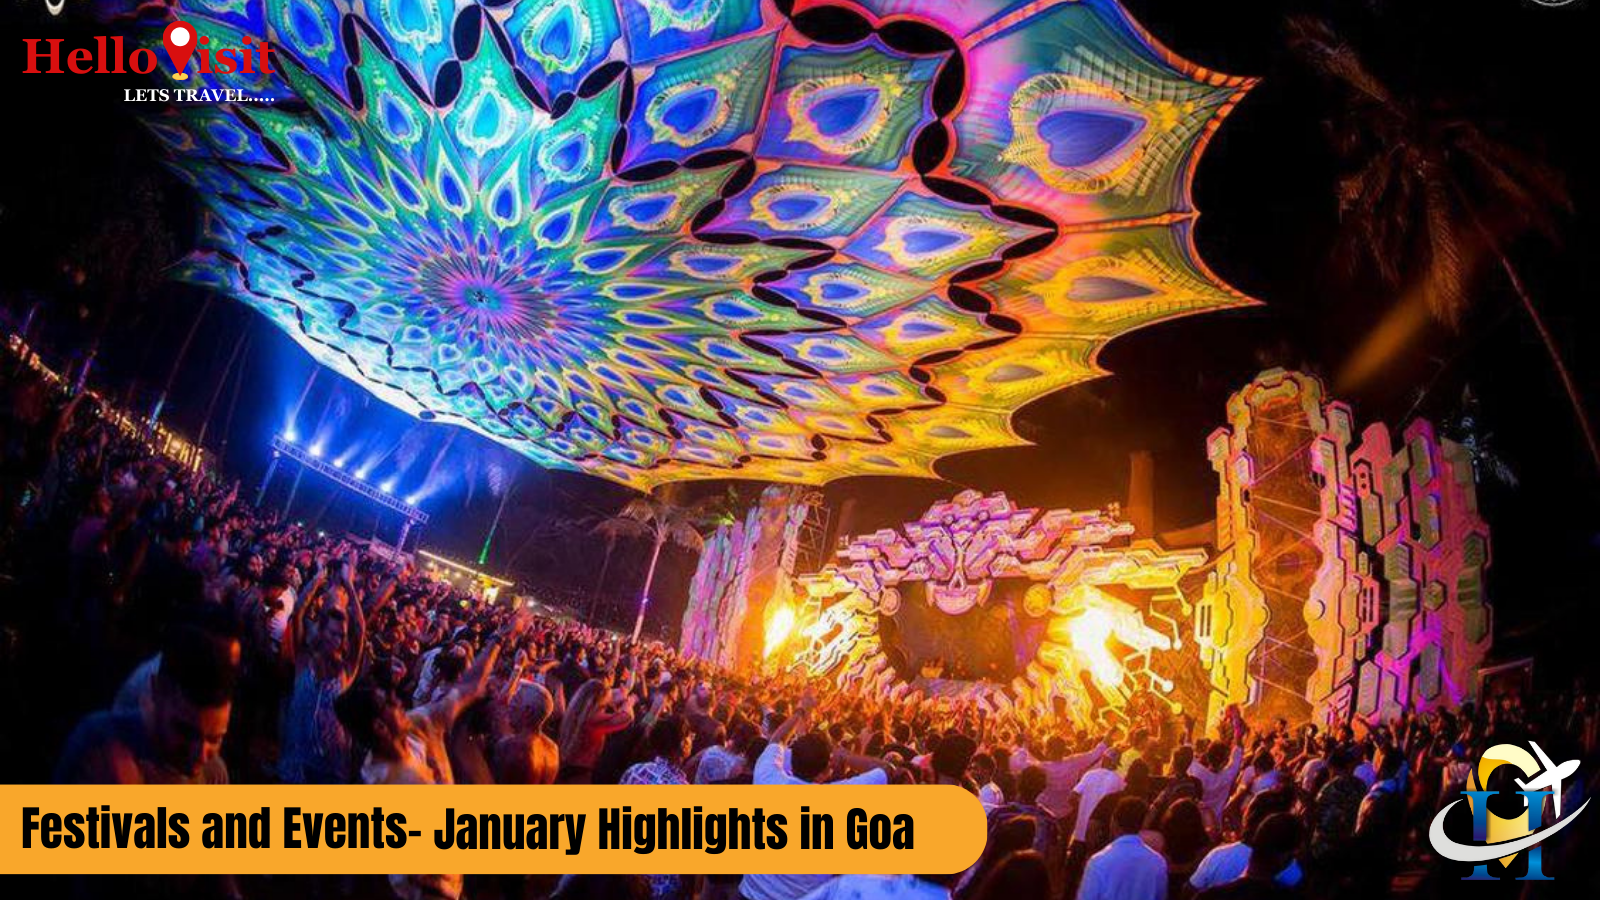 Festivals and Events- January Highlights in Goa